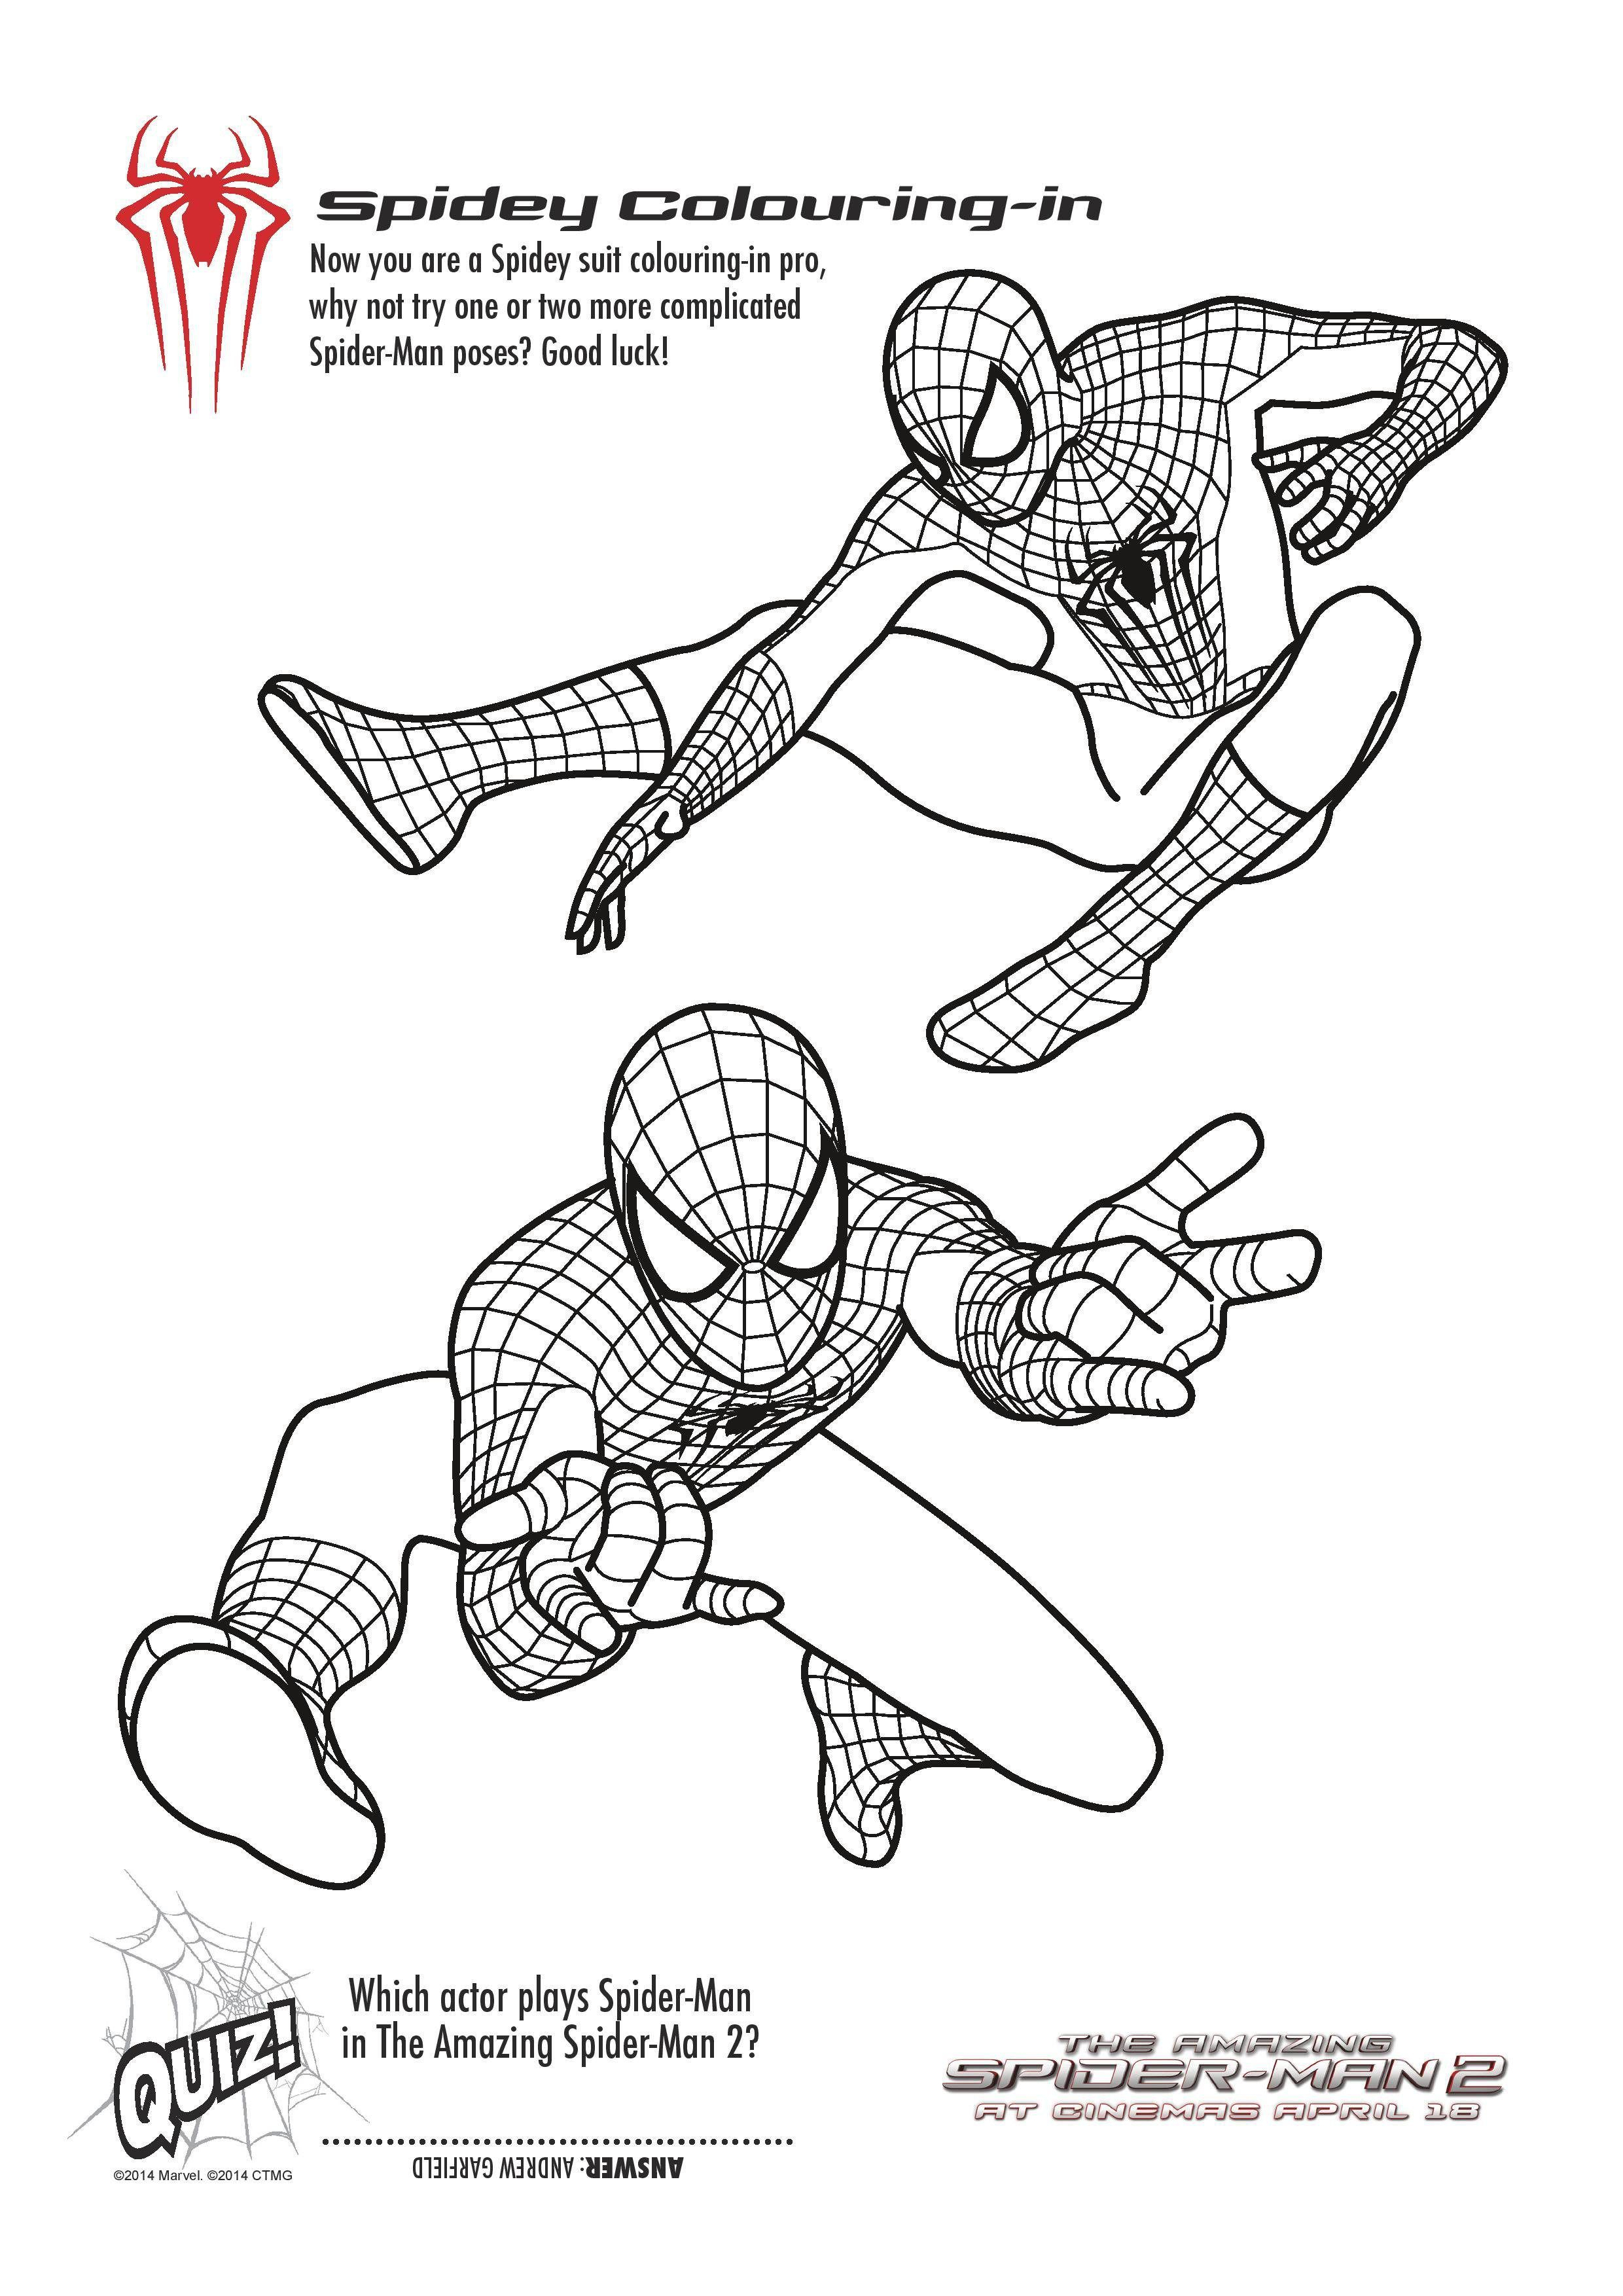 Coloring Pages : Coloringges Free Printable Spiderman Colouring And - Free Printable Spiderman Coloring Pages